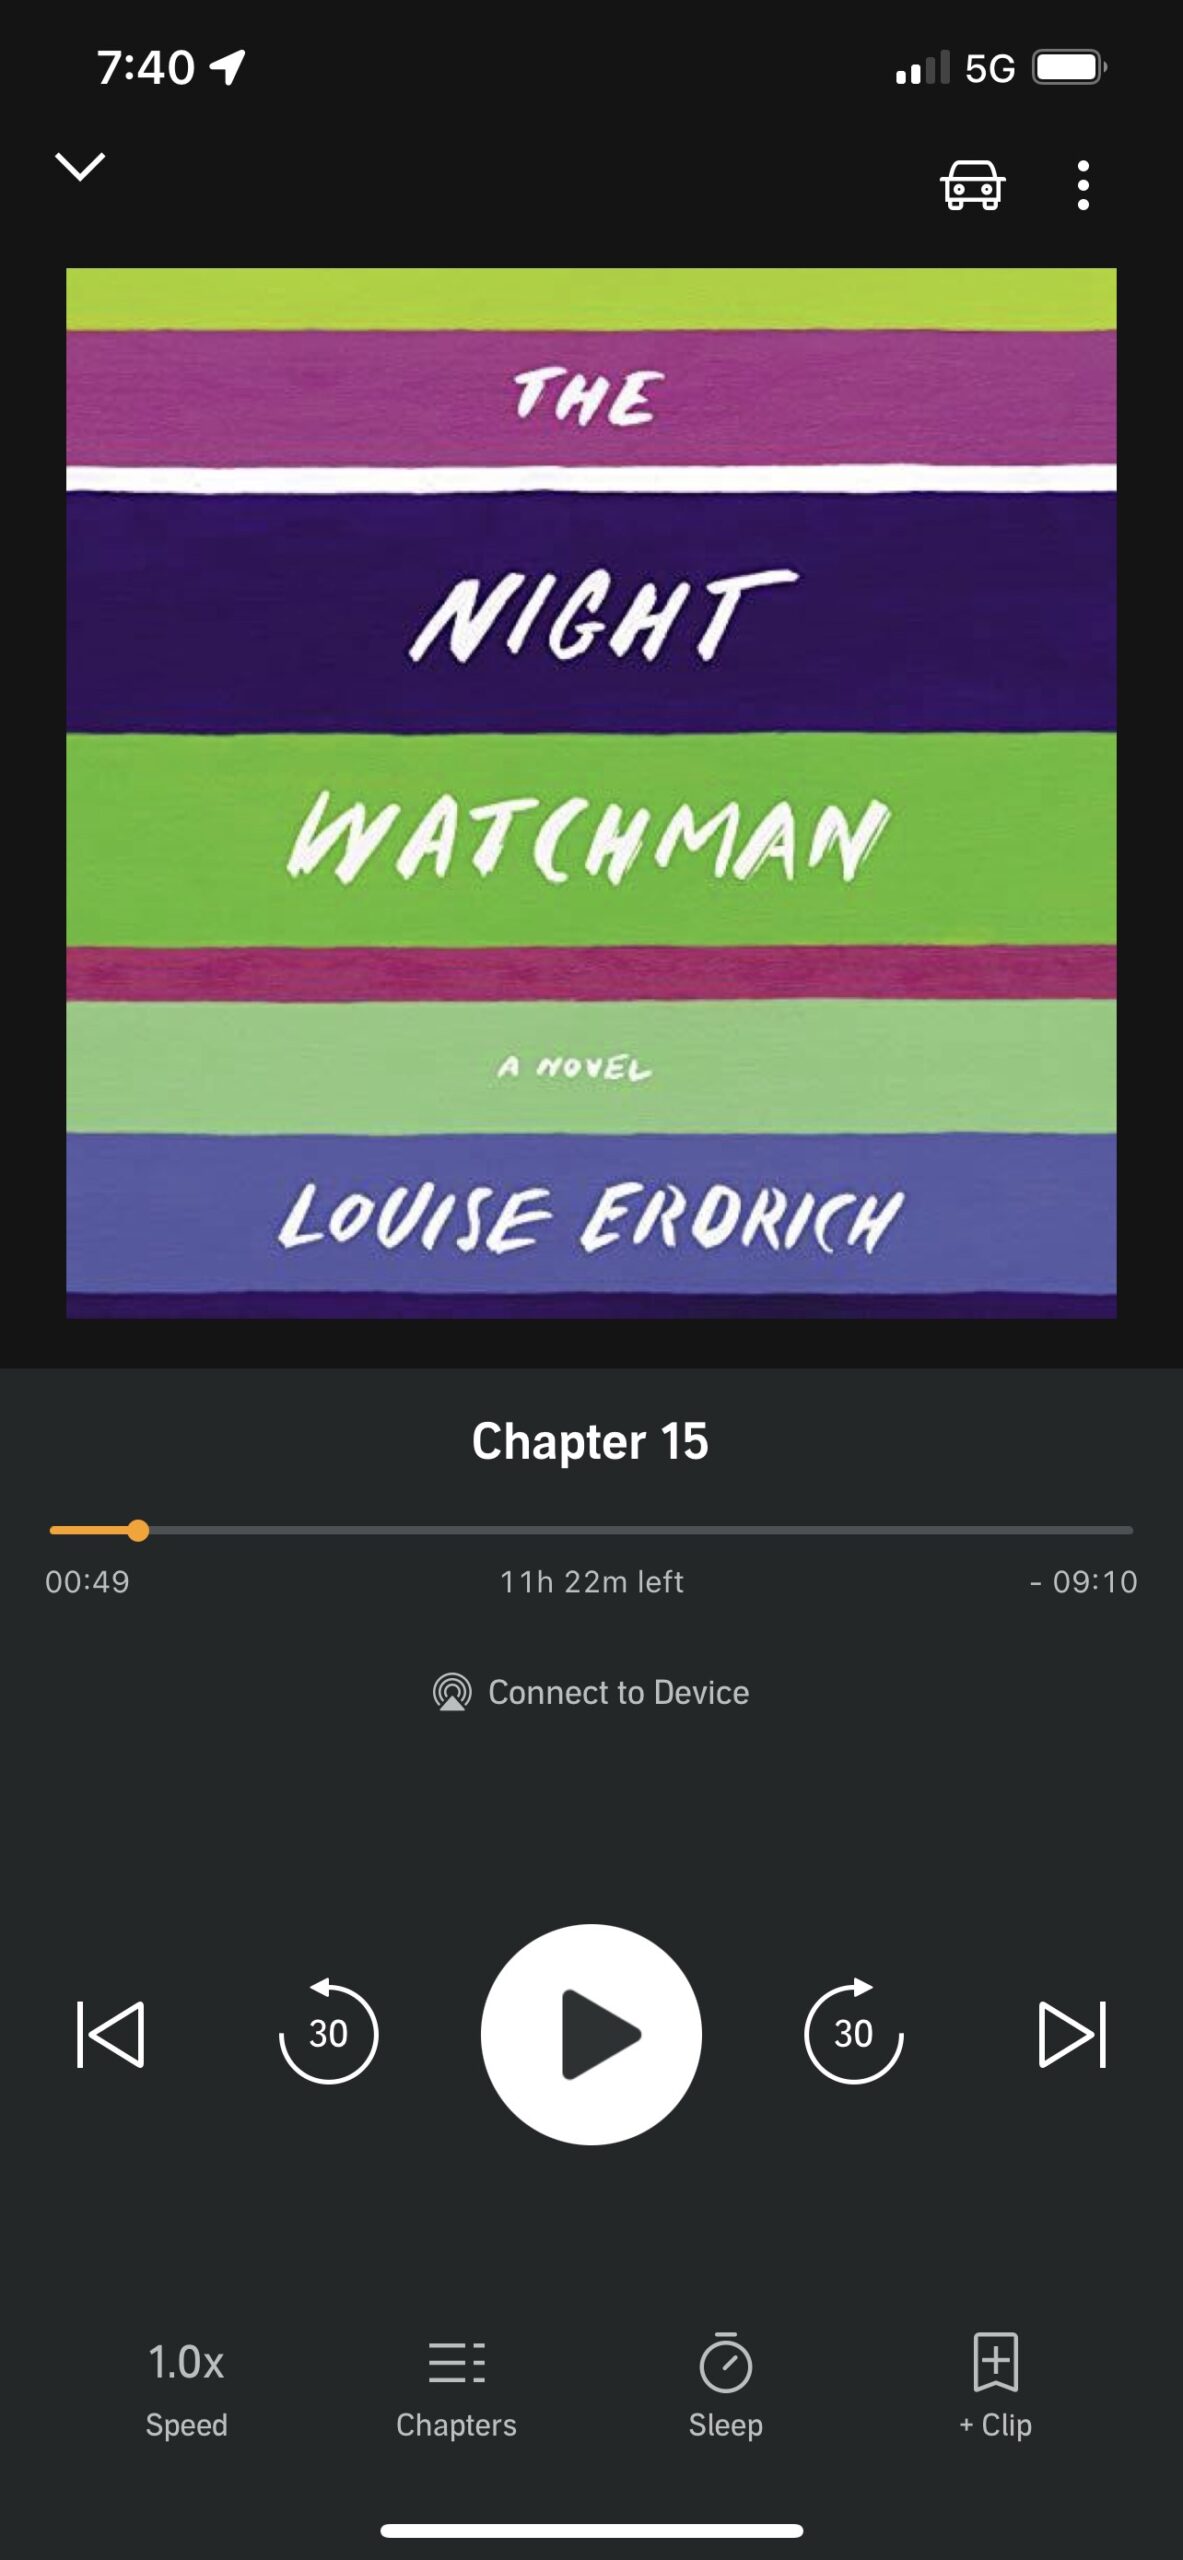 I’m Reading The Night Watchman by Louise Erdrich